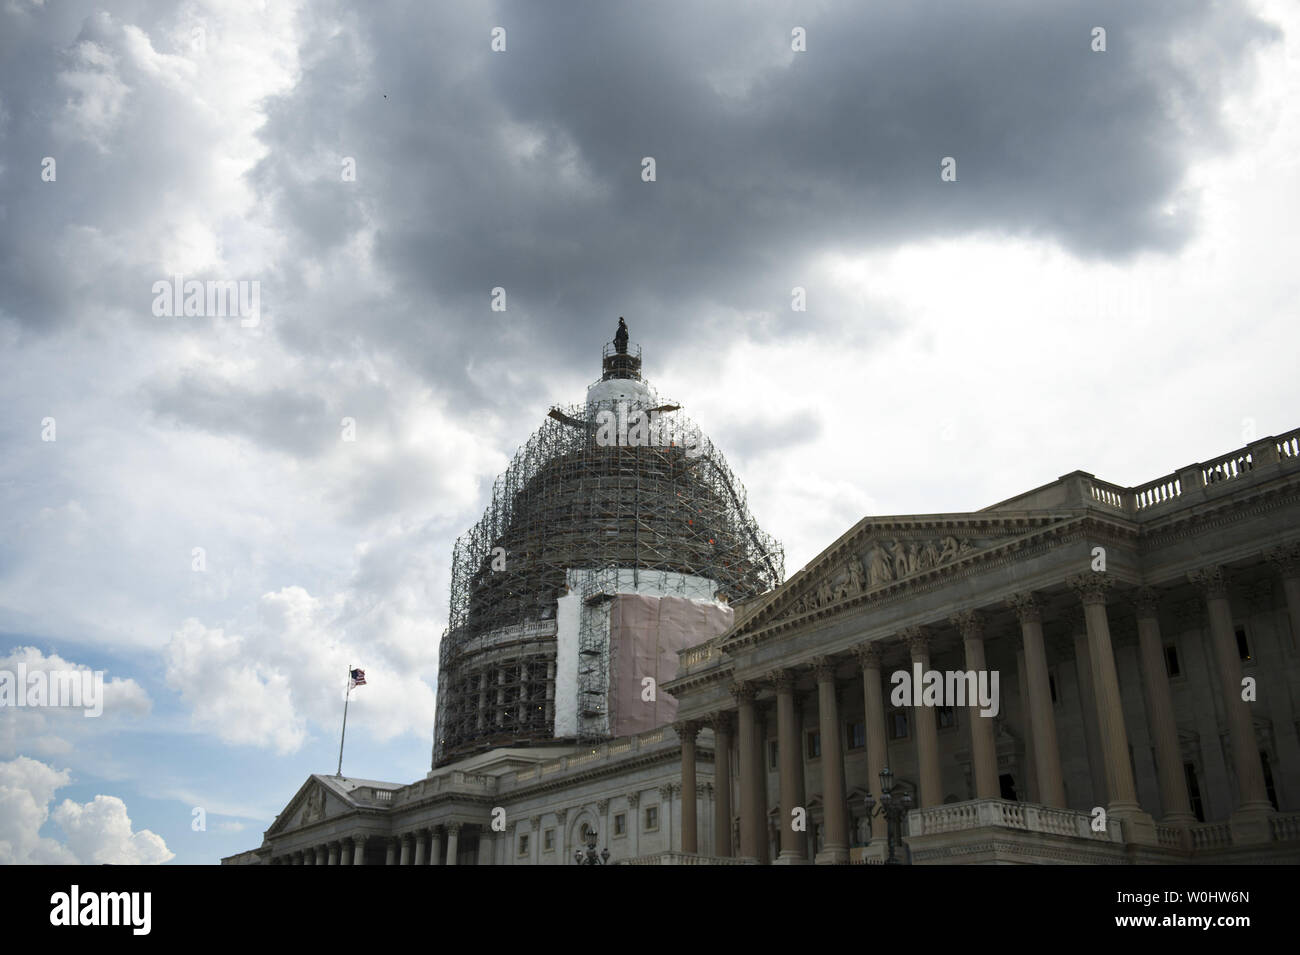 The U.S. Capitol Building is seen prior to a Senate vote on the U.S.A. Freedom Act during a rare Sunday session on Capitol Hill in Washington, D.C. on May 31, 2015. Three intelligence tools are set to expire later today with the Patriot Act, including the NSA's bulk collection of Americans' phone records. Lawmakers are debating the House's U.S.A Freedom Act which will renew certain intelligence tools. Photo by Kevin Dietsch/UPI. Stock Photo